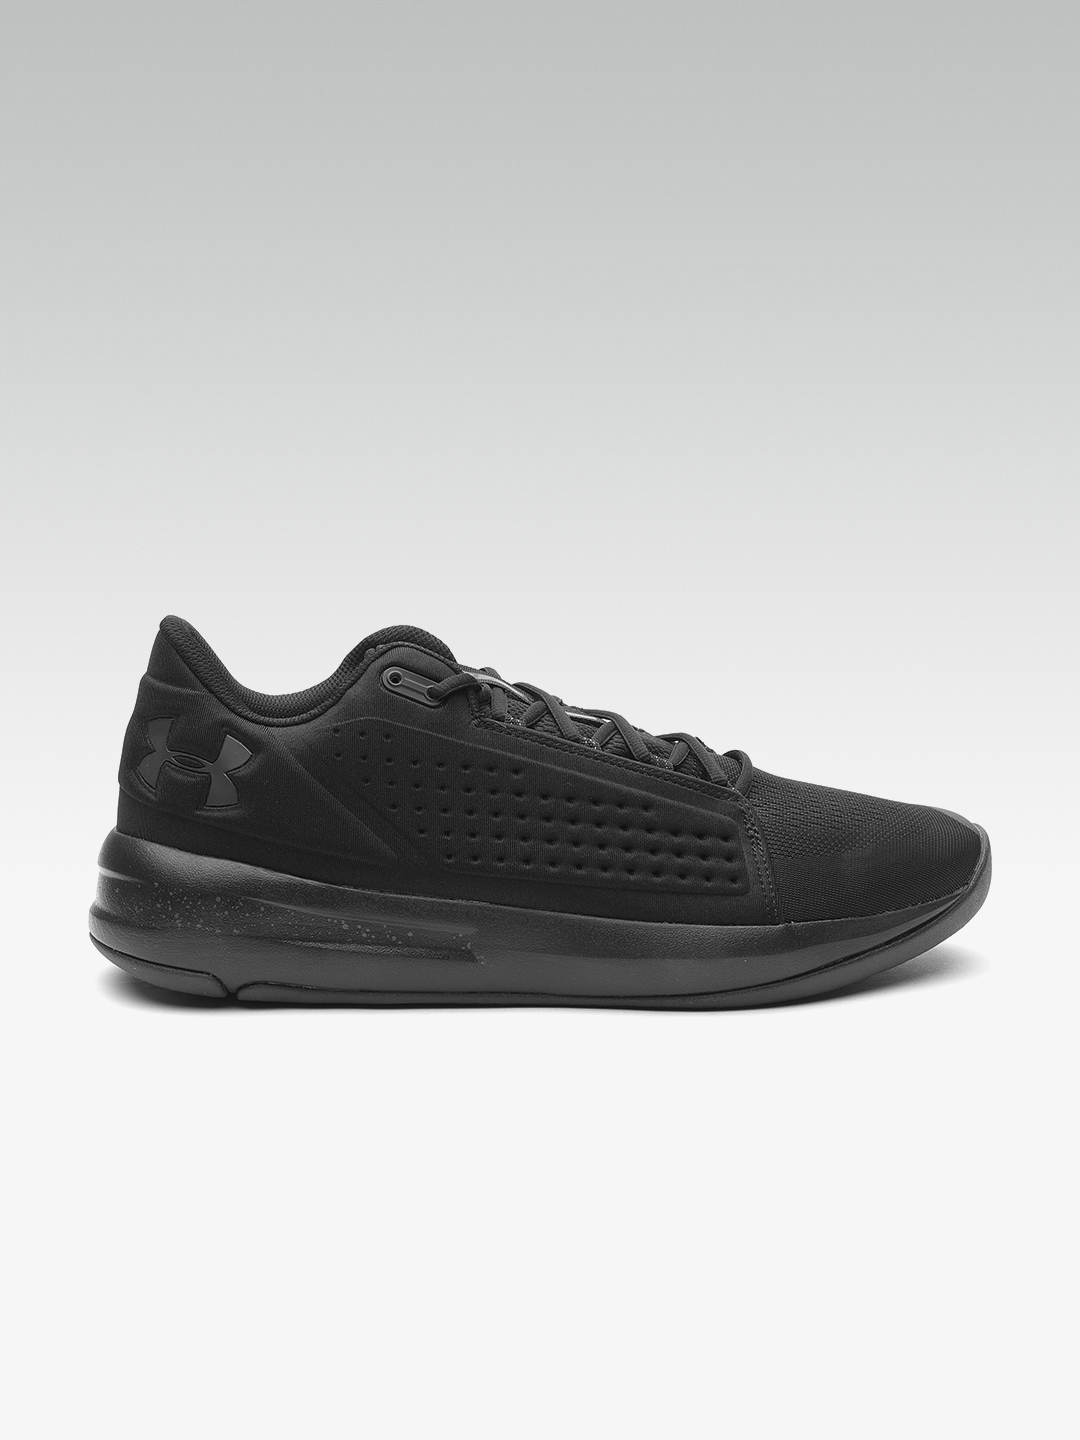 men's ua torch low basketball shoes